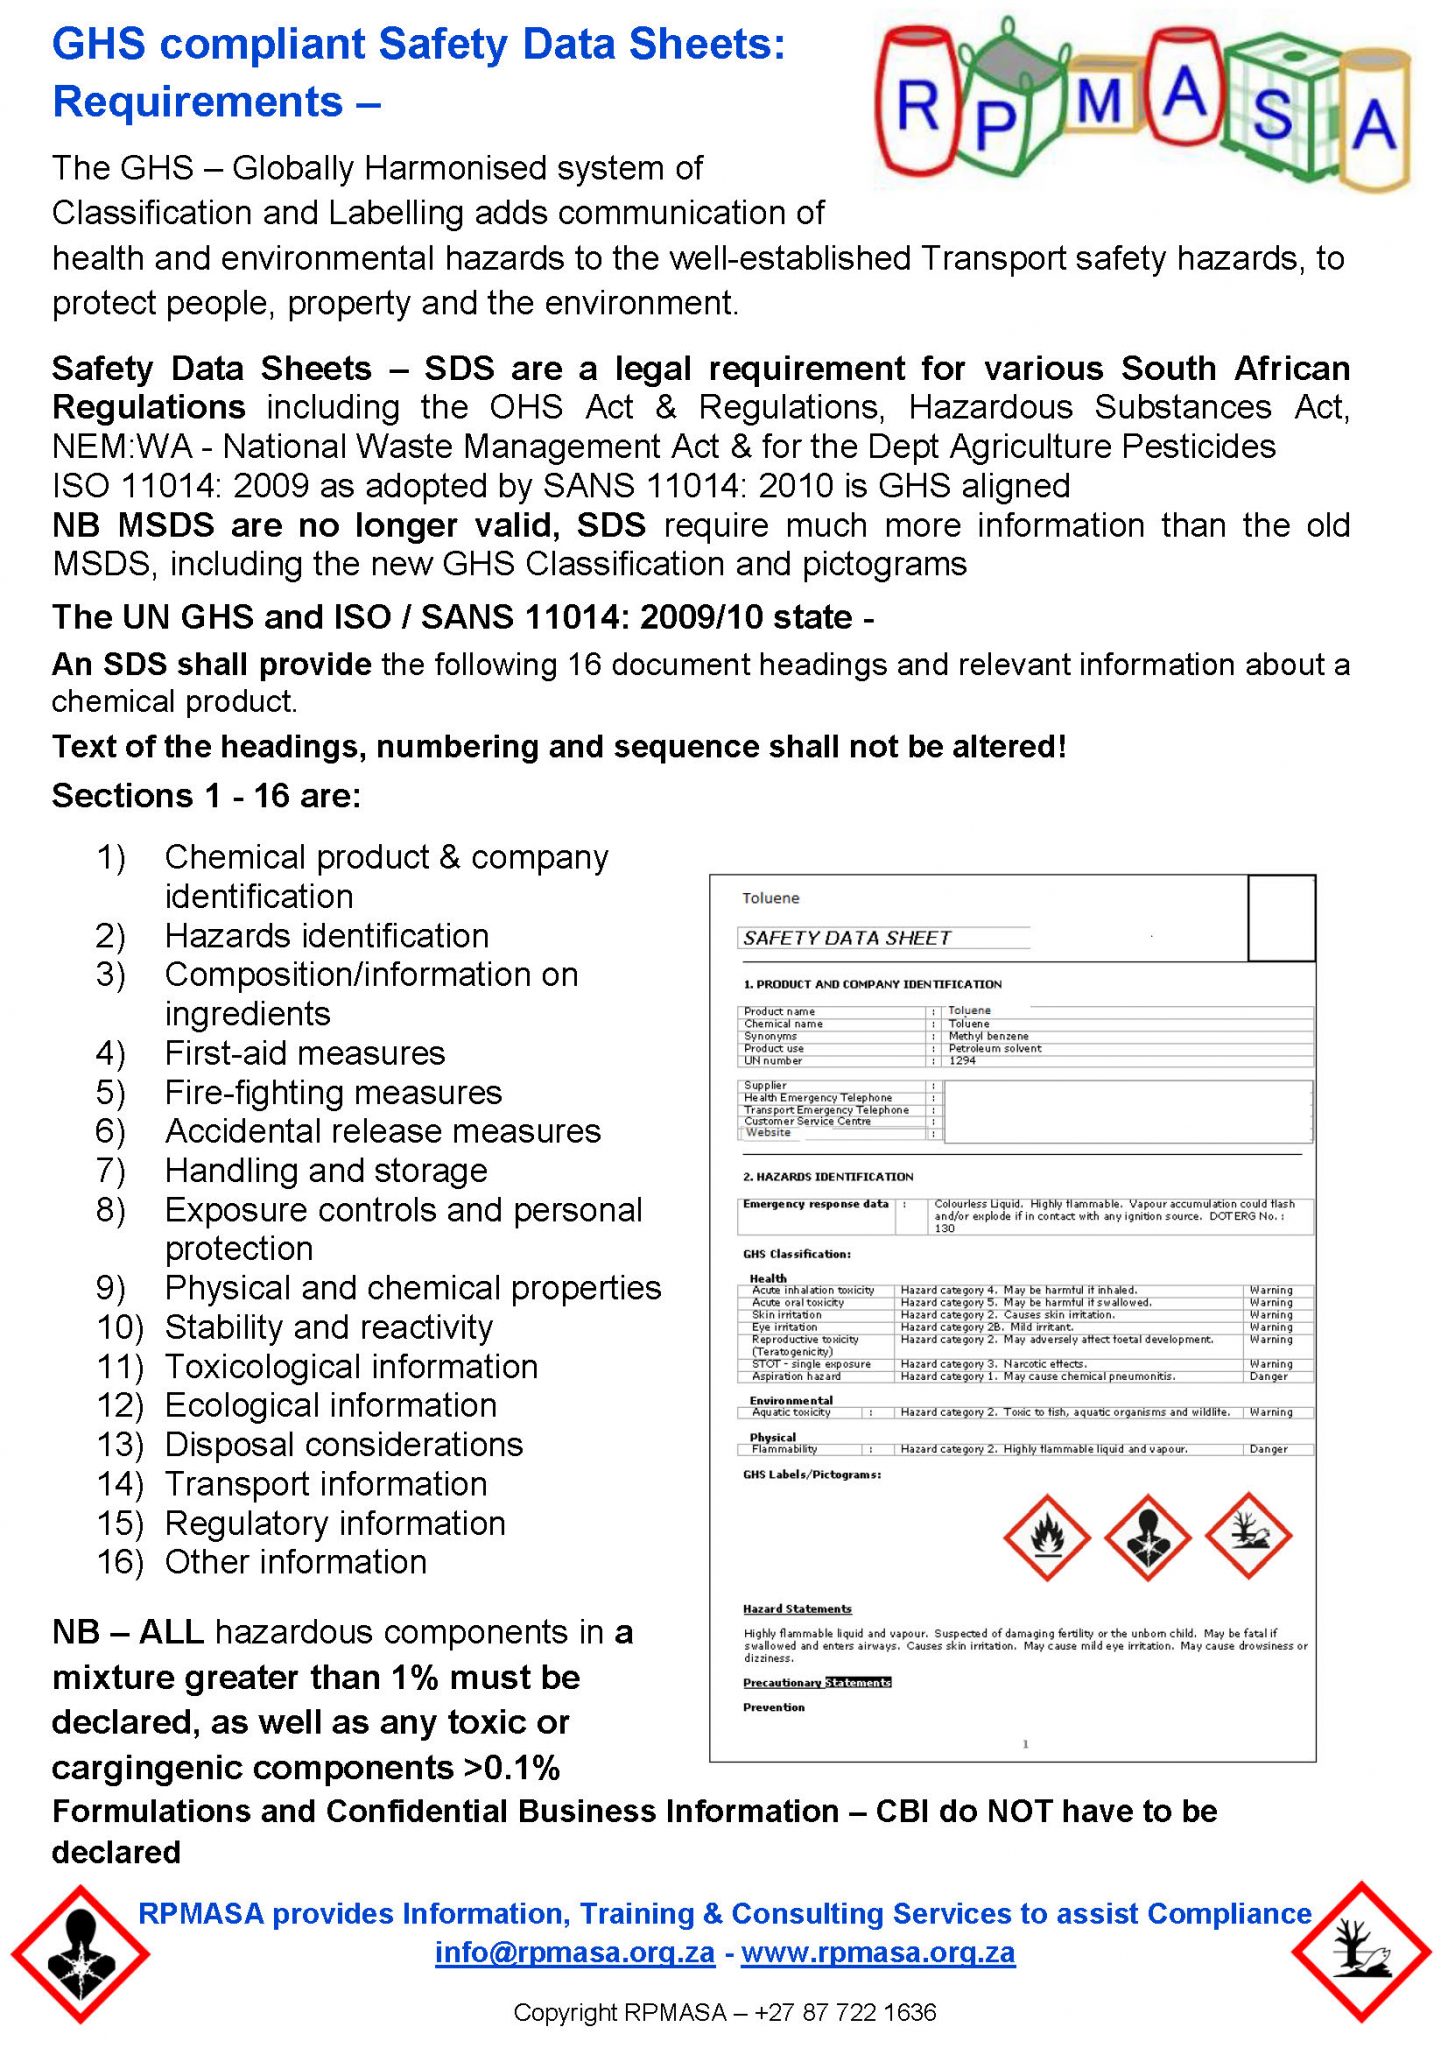 GHS compliant Safety Data Sheets Requirements RPMASA